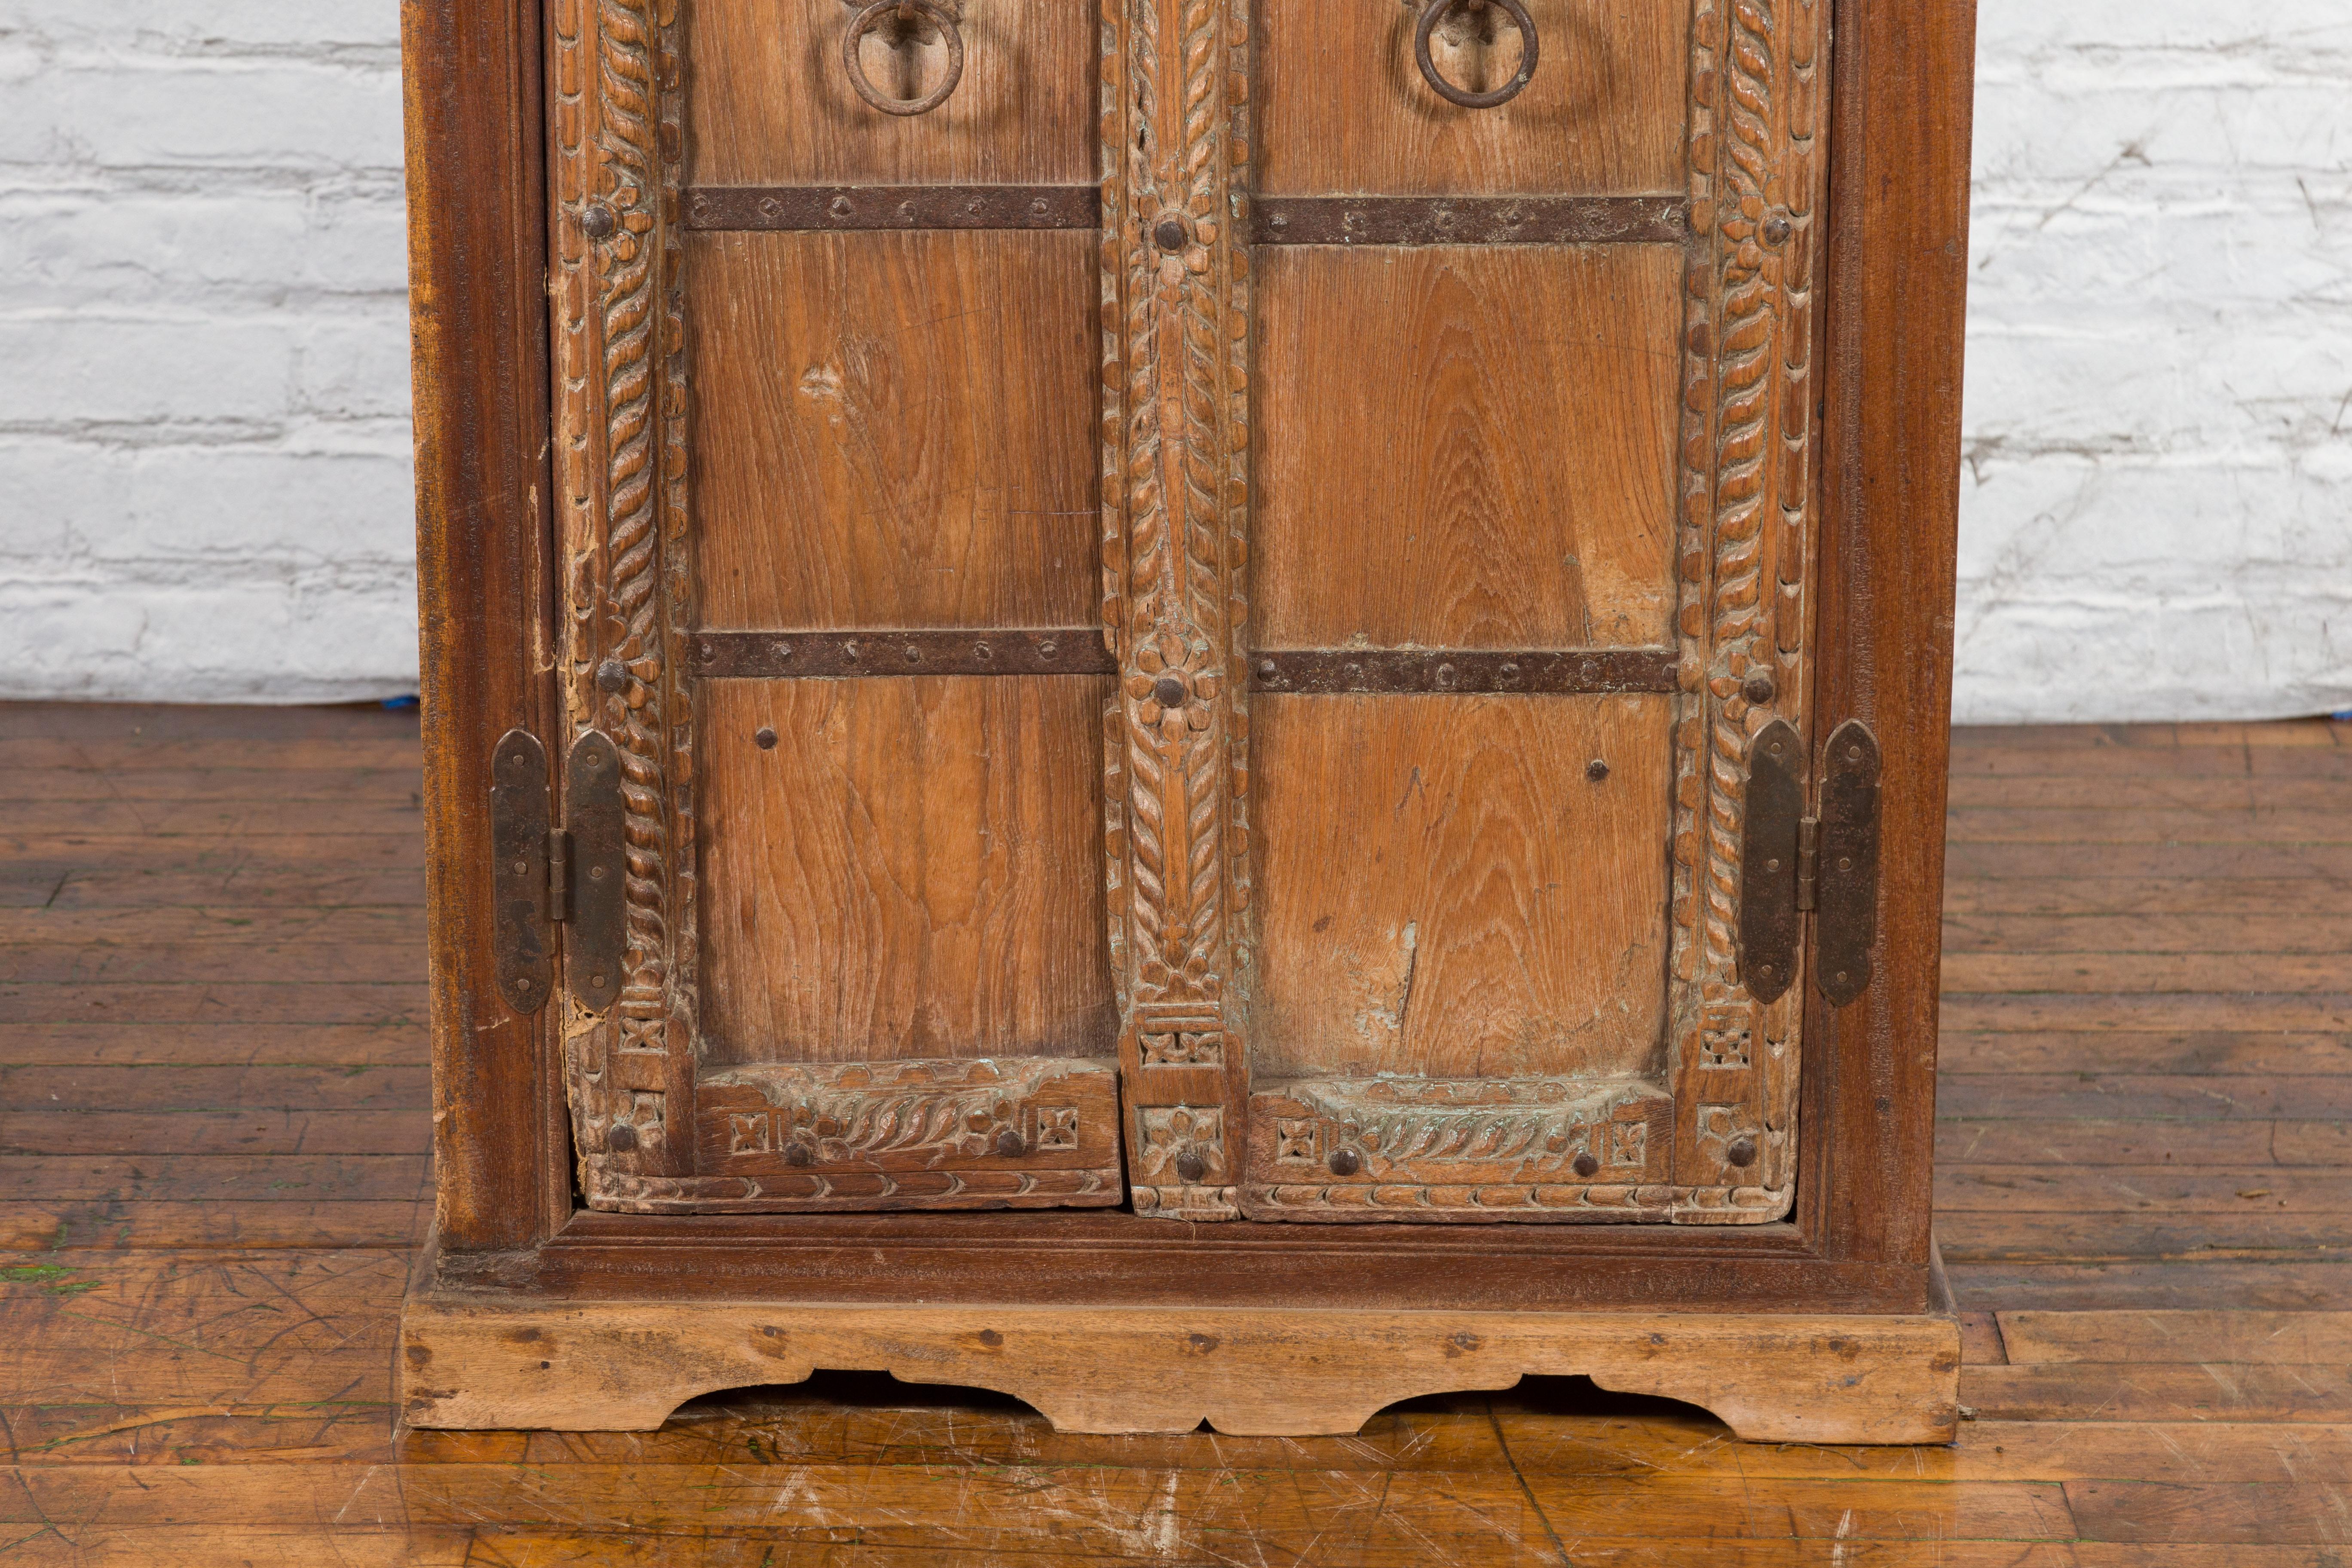 Antique 19th Century Indian Armoire with Metal Braces and Hand-Carved Décor 4